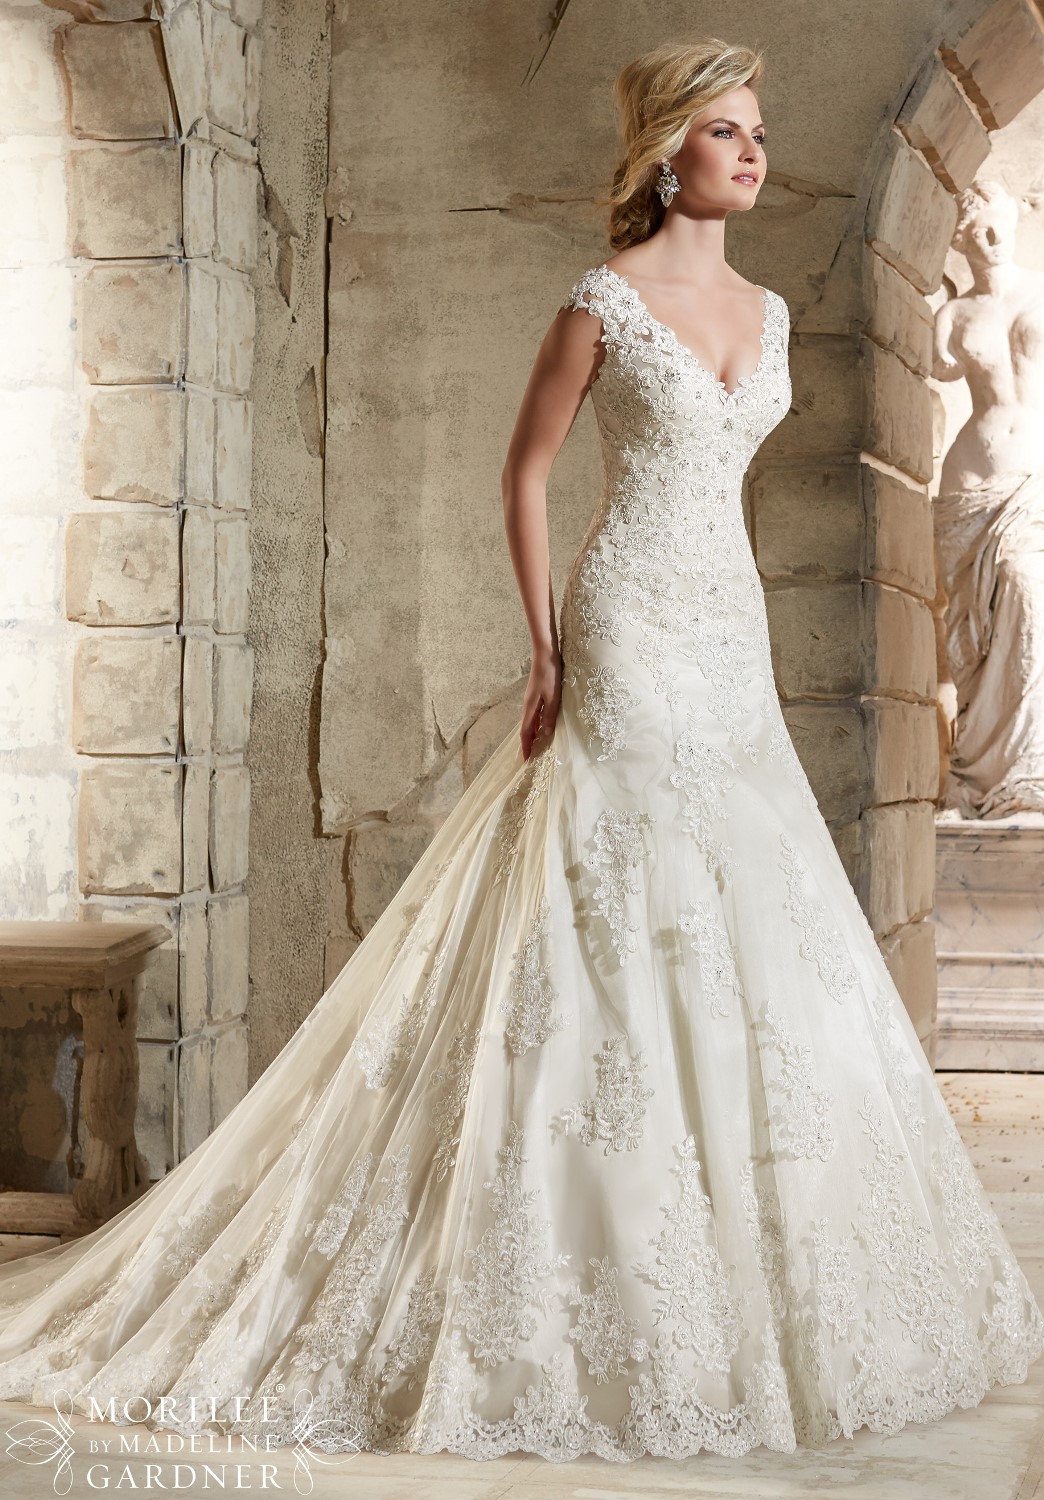 prices of mori lee bridal gowns